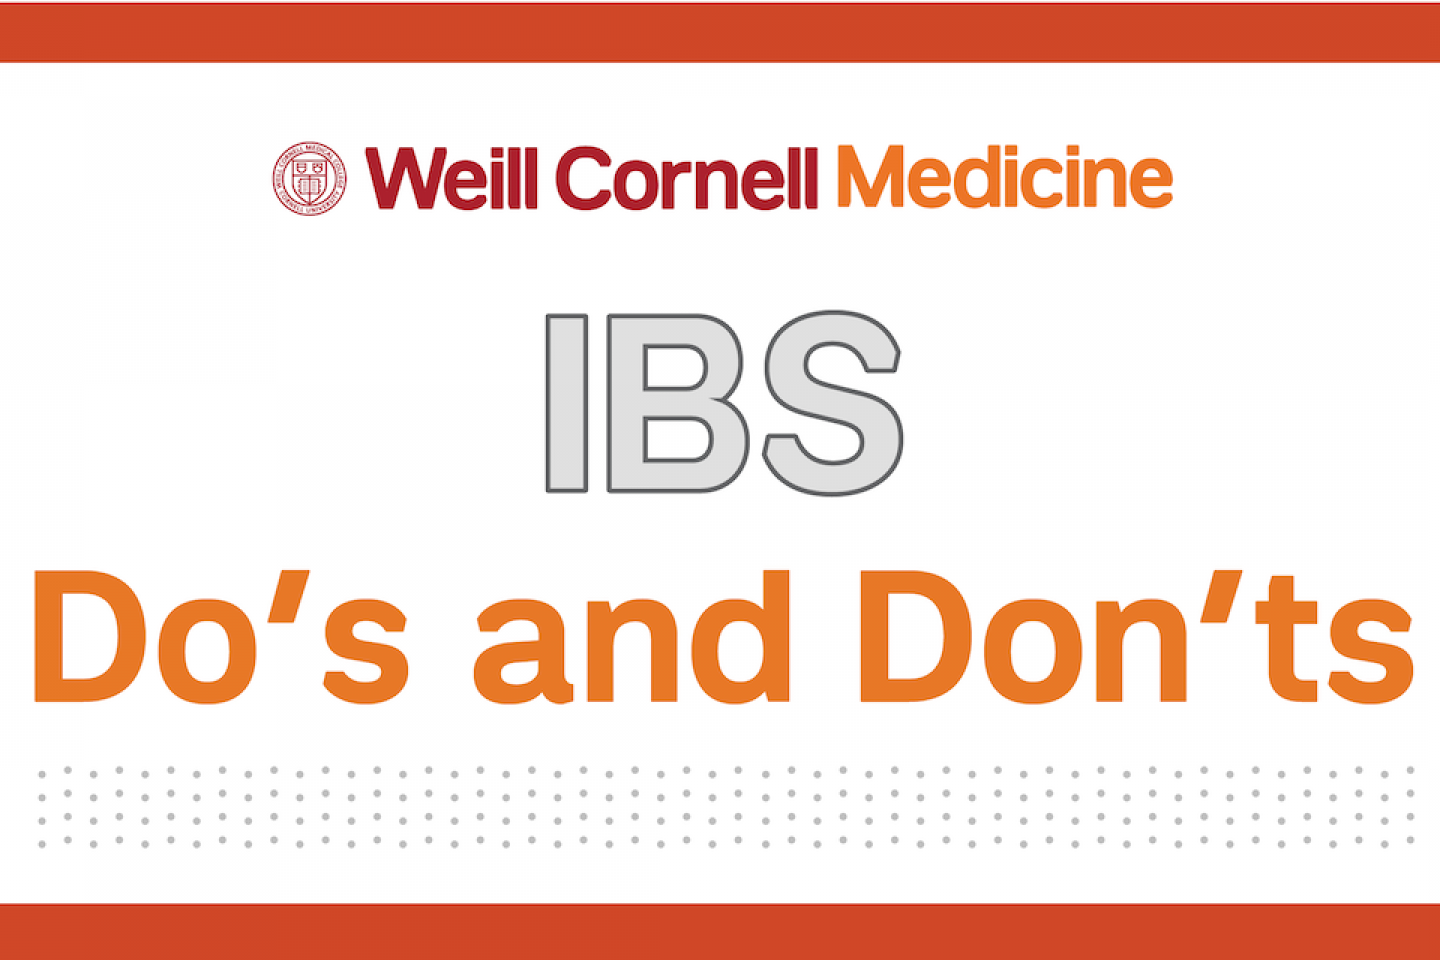 IBS Dos and donts